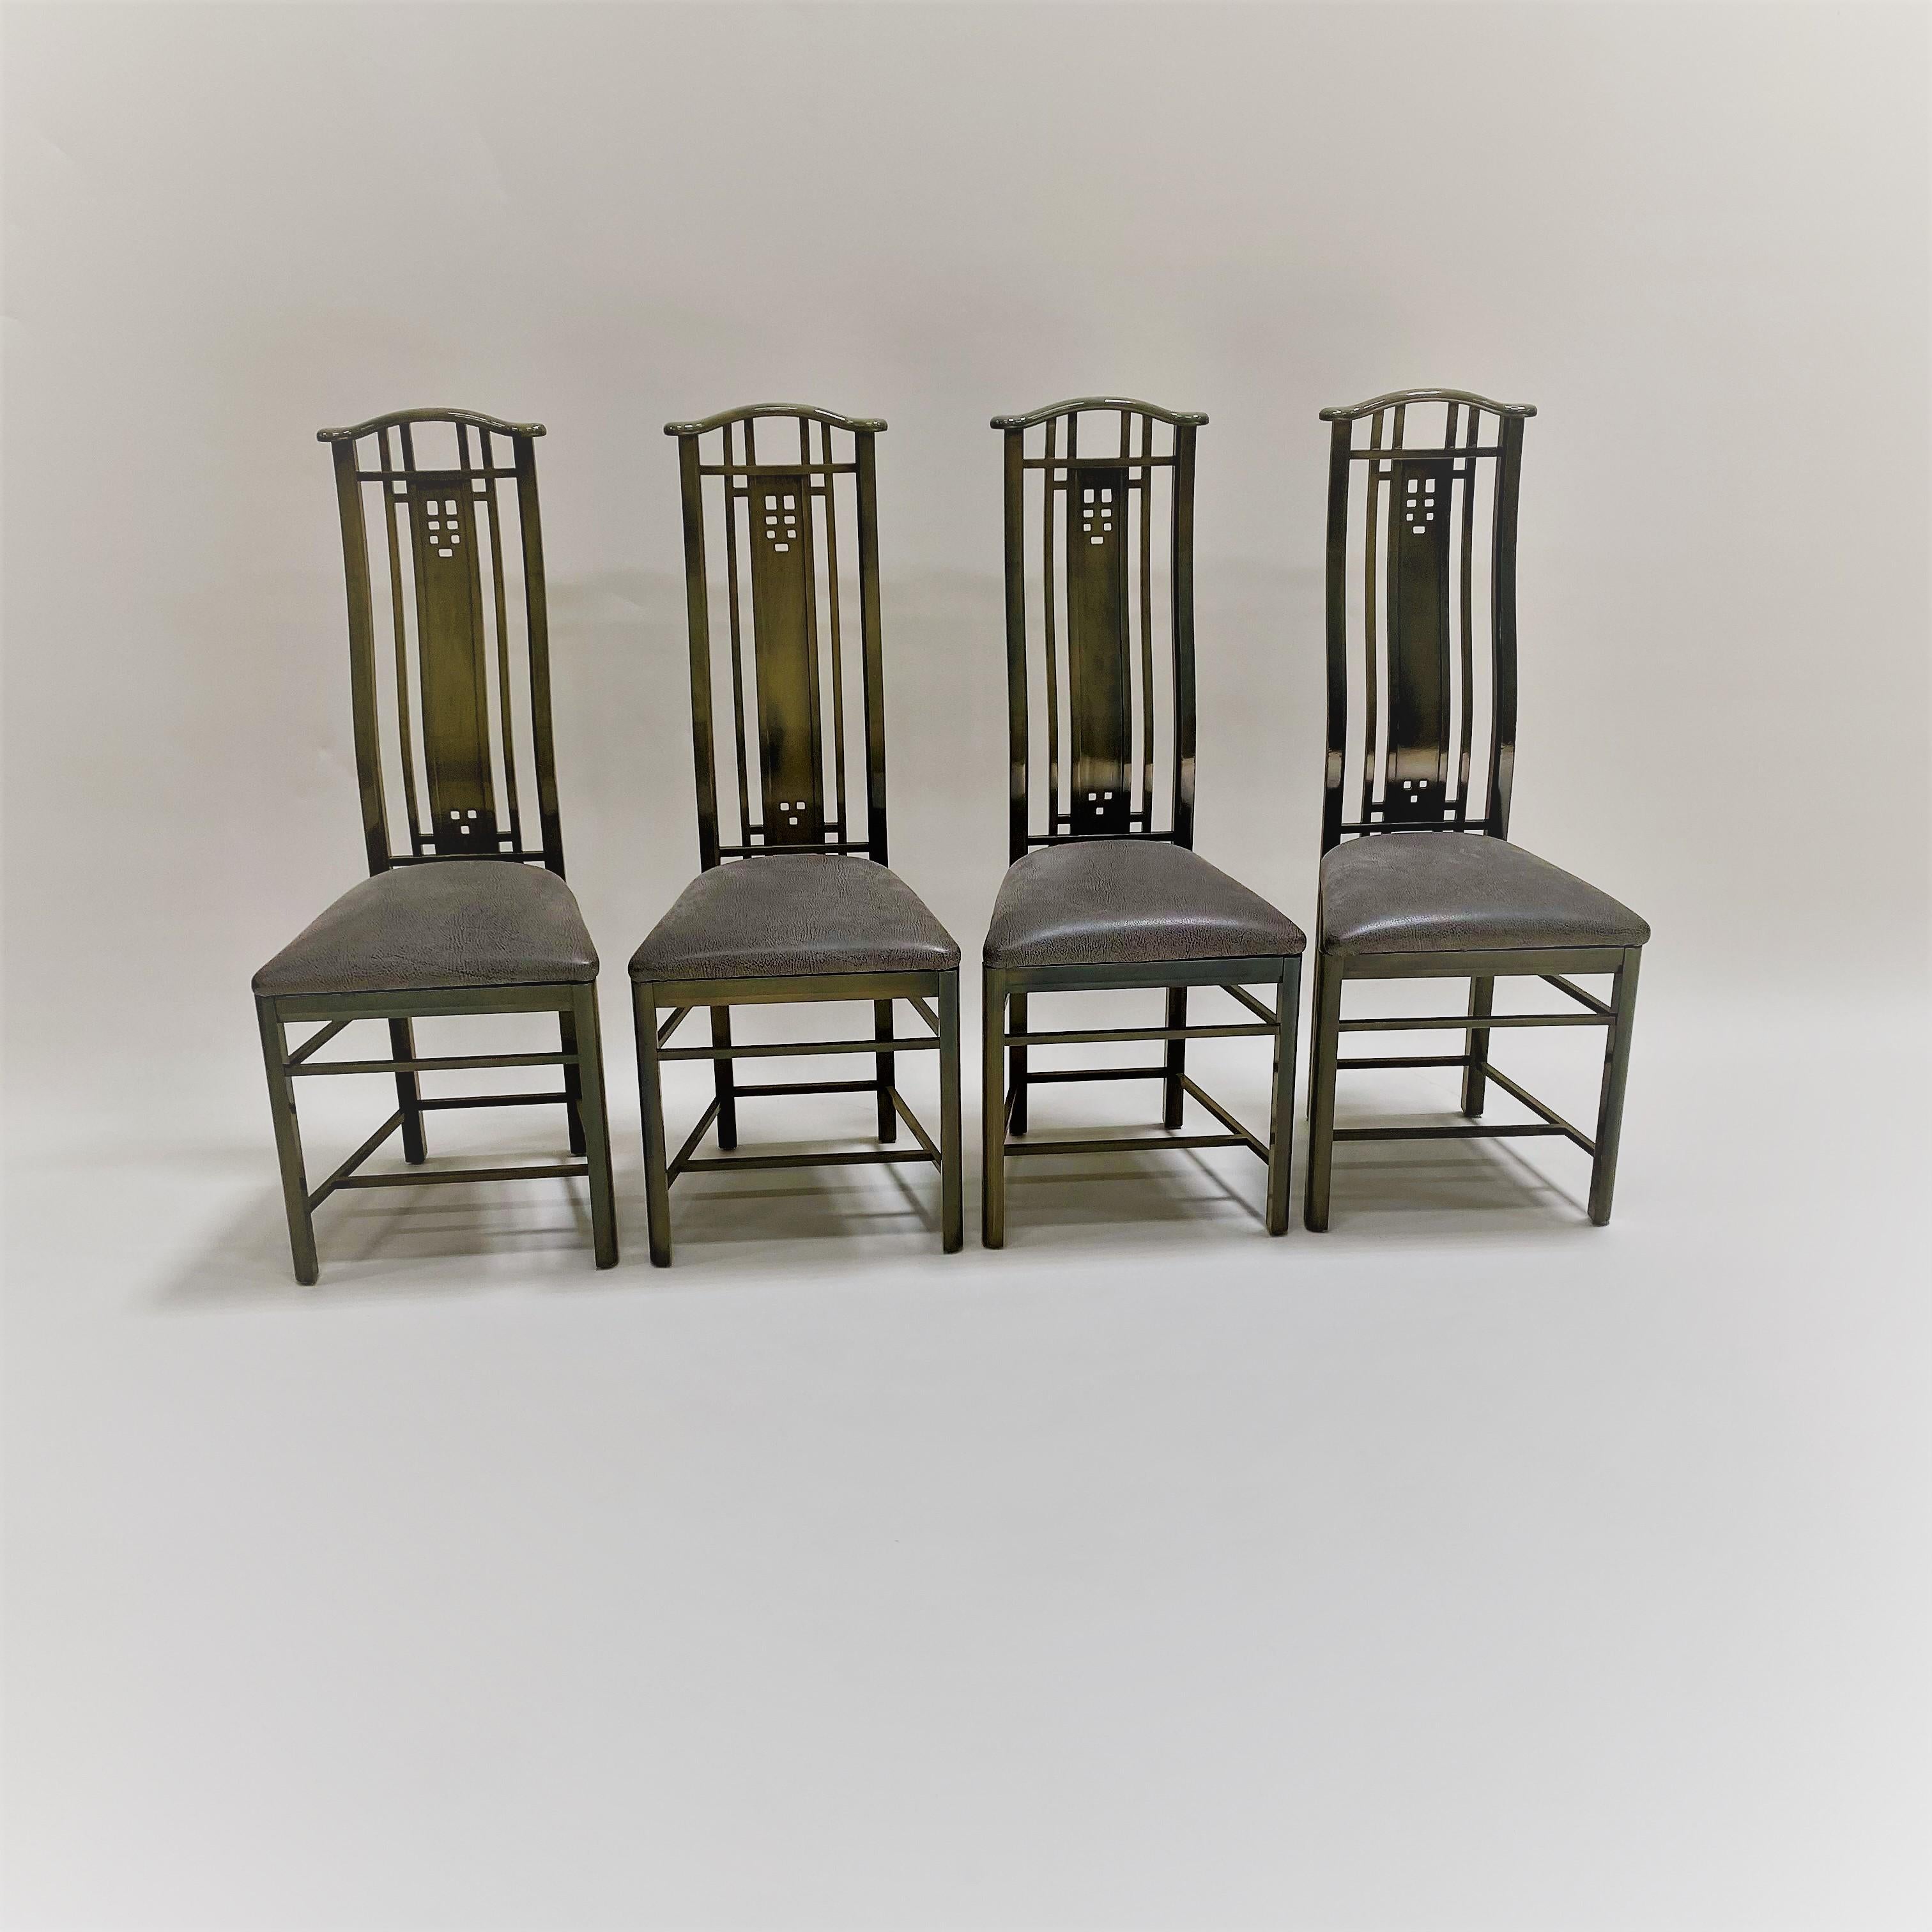 Italian Set of 4 High Back Lacquered Dining Chairs by Umberto Asnago for Giorgetti, 1980 For Sale